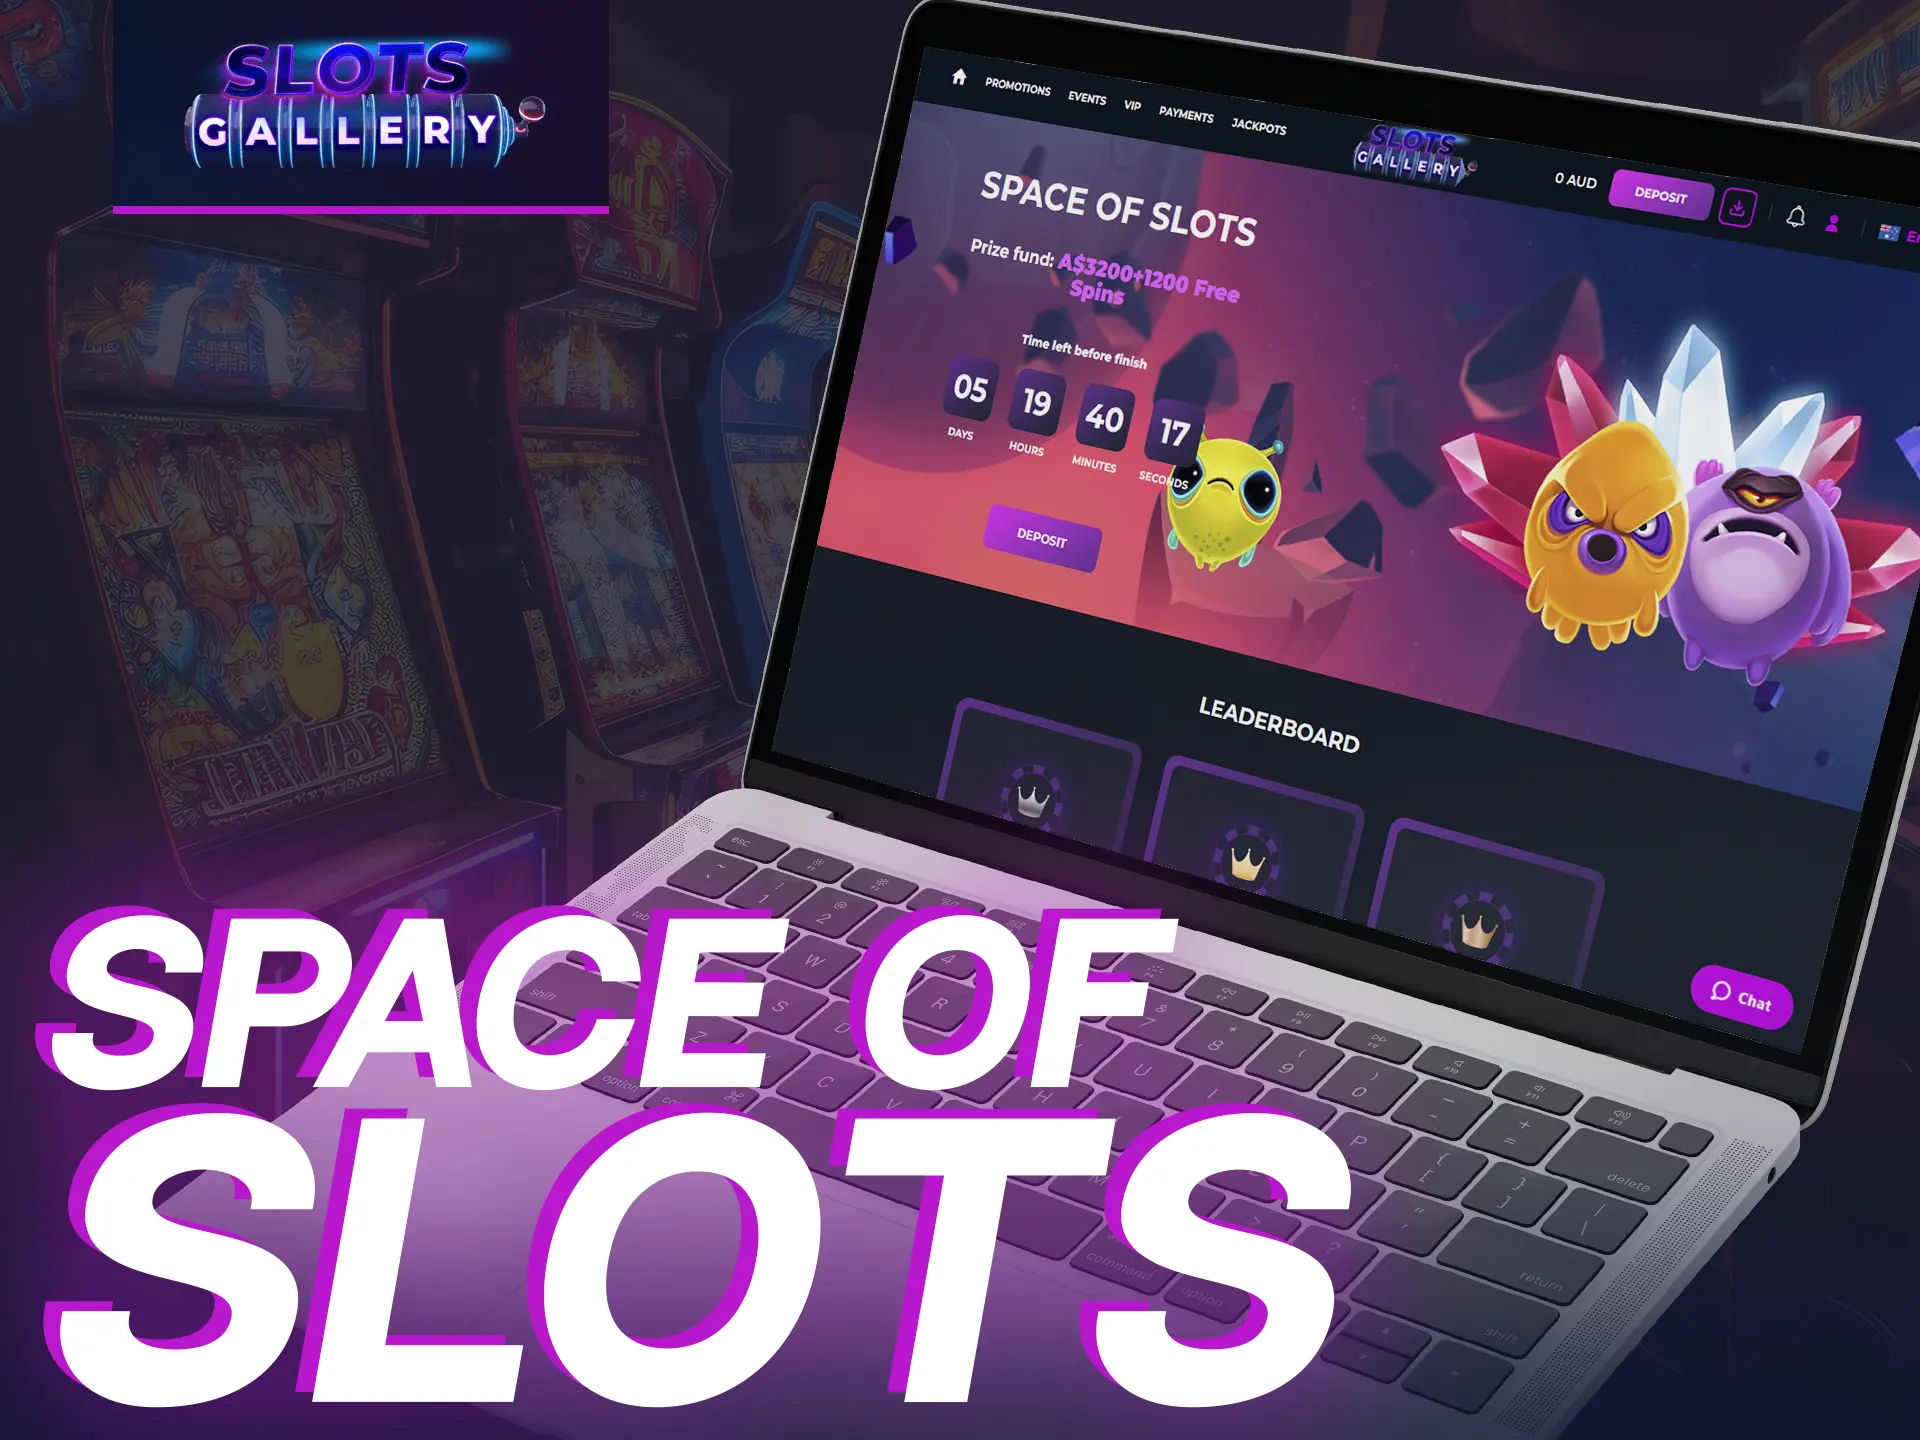 Join Slots Gallery's Space of Slots for extraordinary prizes.